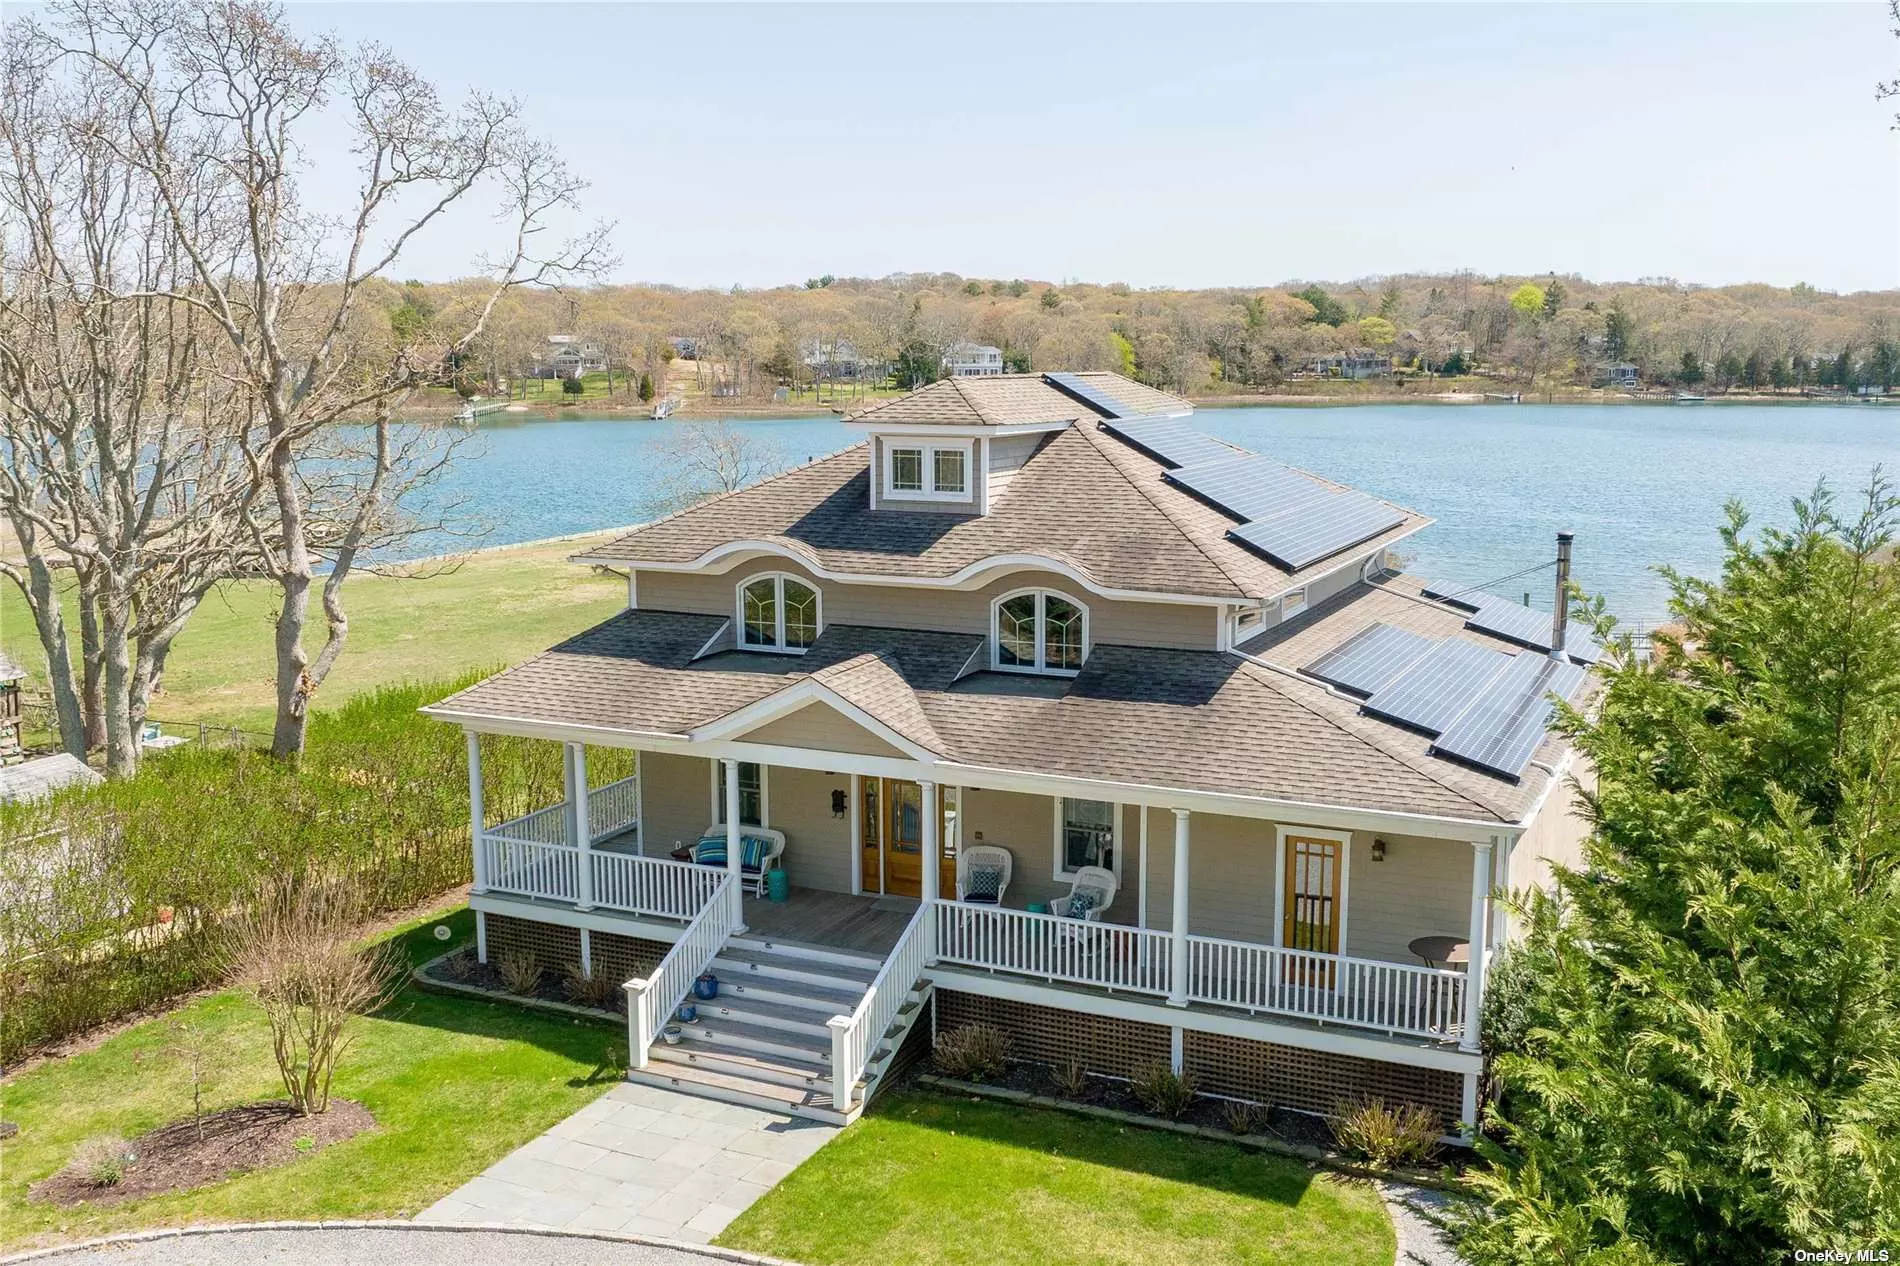 Set on a half acre, this custom-built boat-lover&rsquo;s home features a private dock and expansive views of Peconic Bay. Nearly every room in this shingle-style traditional home is showered with aqua blue light from the Bay, while framing beautiful views across to Robin&rsquo;s Island. Large windows light up every room with endless views, flanked by the custom kitchen, large pantry and light-filled breakfast/dining room on one side, and the richly-lite family room with wood burning stove on the other. A half bath, den with adjoining full bath finish off the ground floor level. The second-level owner&rsquo;s suite, featuring breathtaking views from every angle and luxurious, spa-like bathroom. Two guest bedroom, full bath and laundry room finish off this level. The magnificent back deck and lavish plantings make this outdoor space a true oasis and this is complimented by the large outdoor shower. The setting and views are unparalleled.